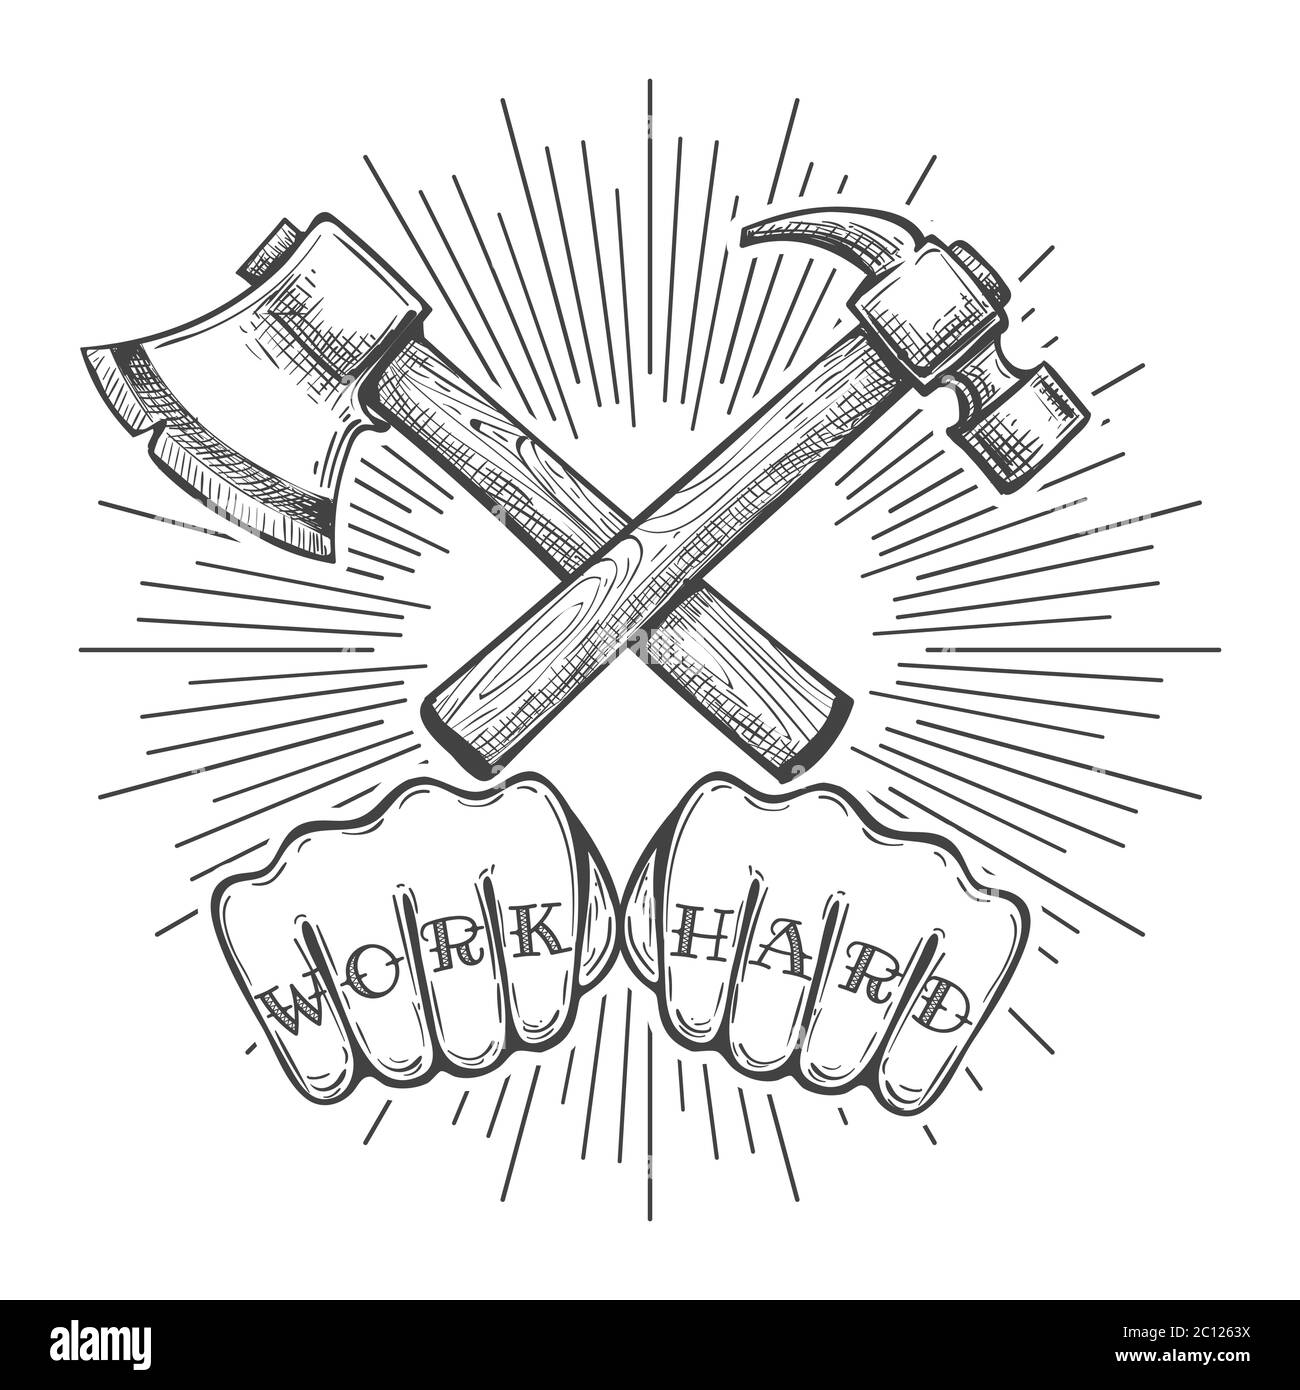 Human Fists with letters Work Hard under crossed axe and hammer. Tattoo in engraving style. Vector illustration. Stock Vector